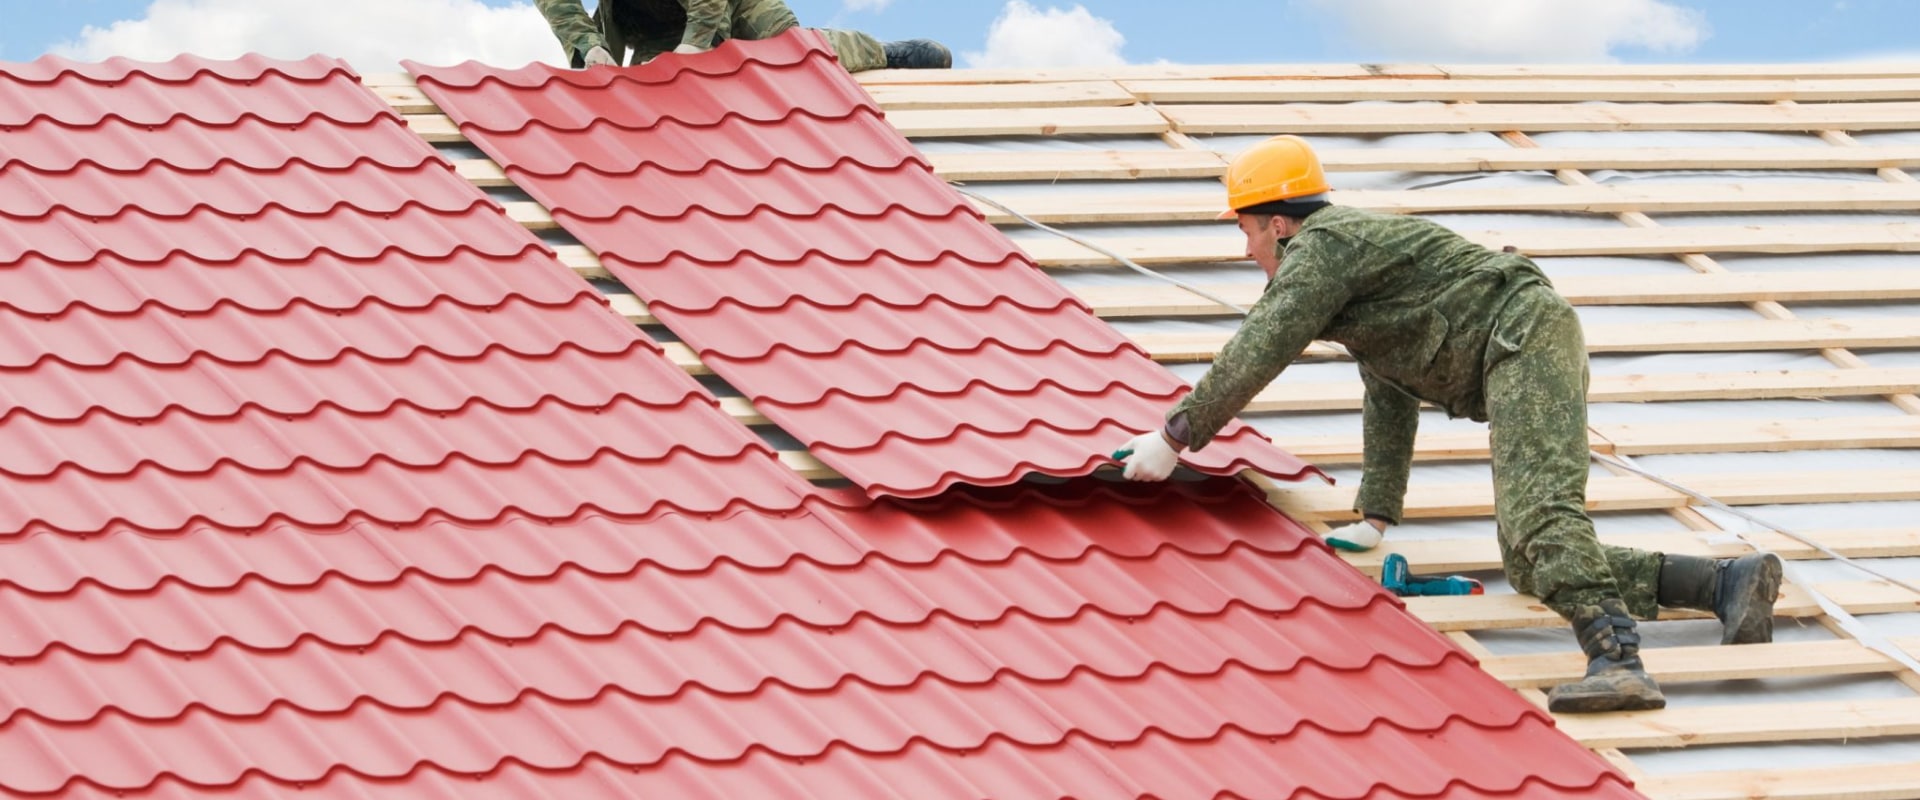 Why roofing is used?